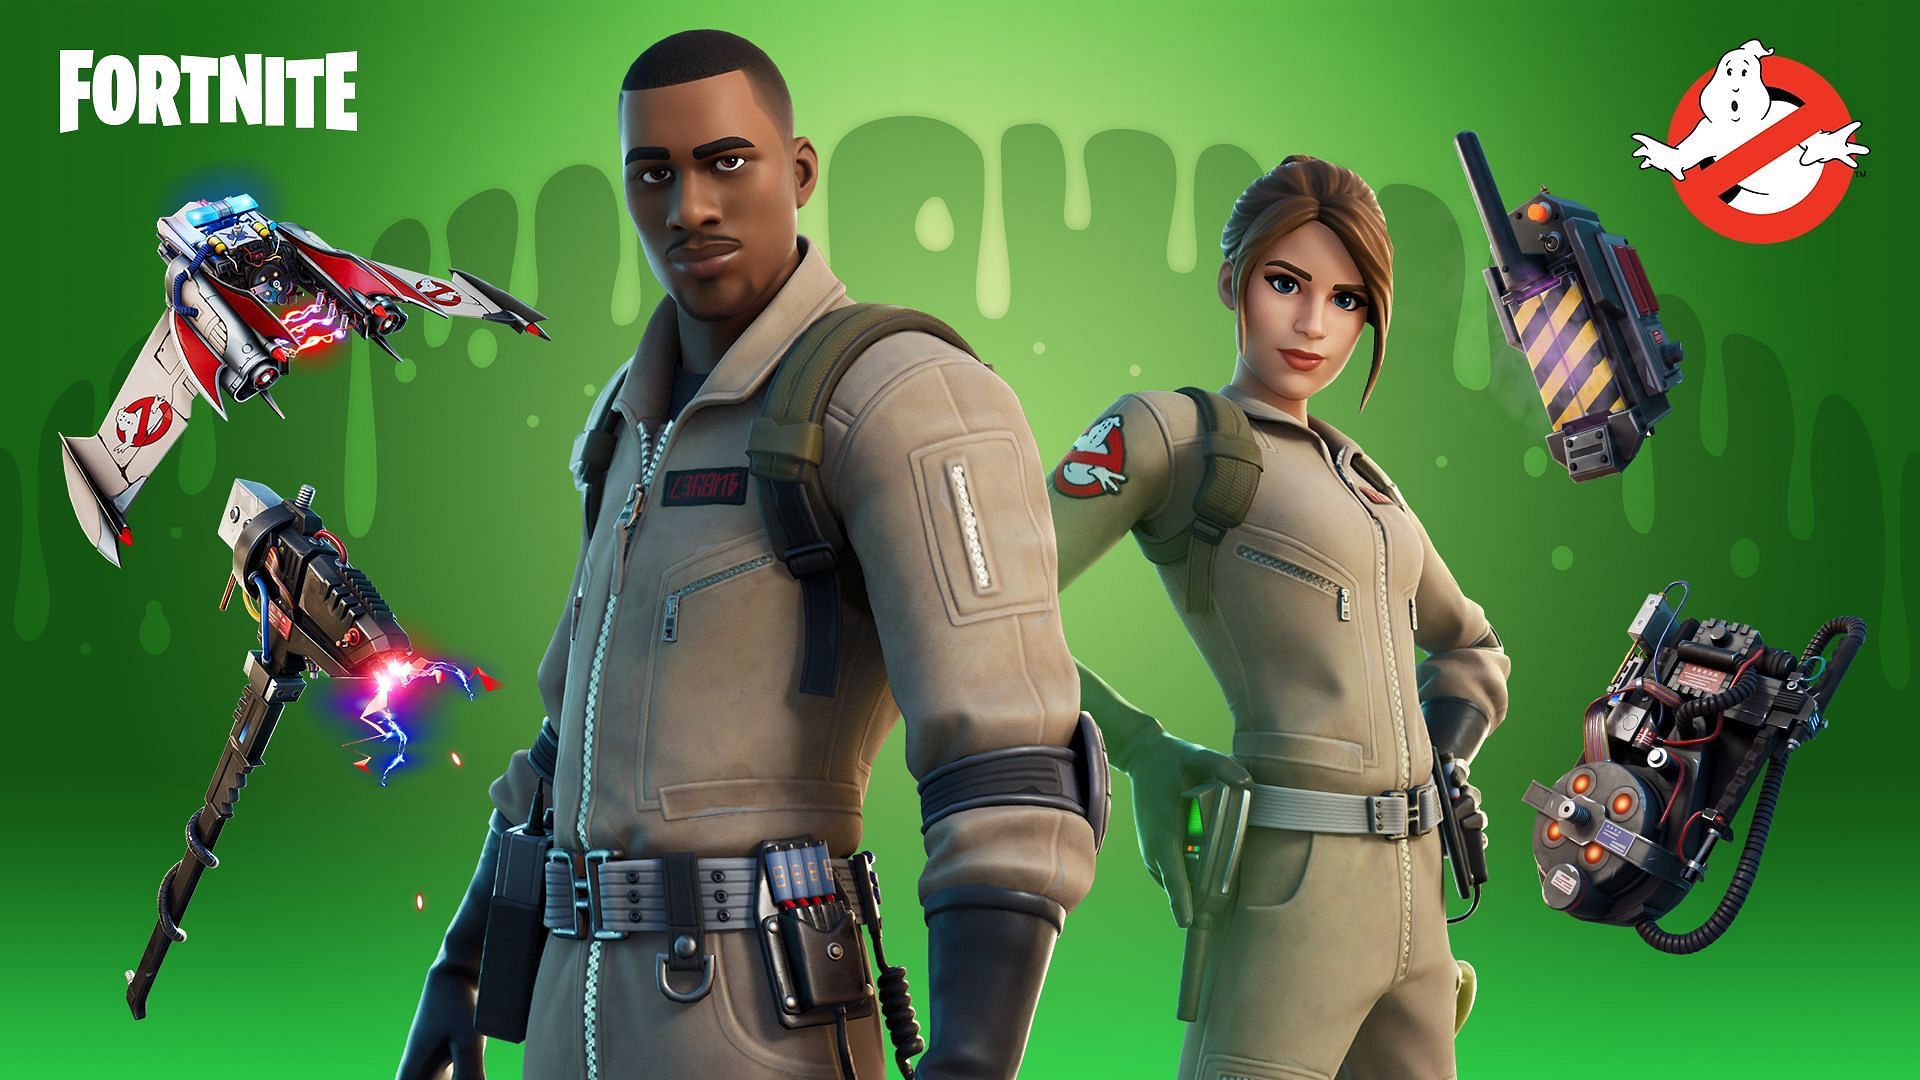 Ghostbuster collab in Fortnite (Image via Epic Games)